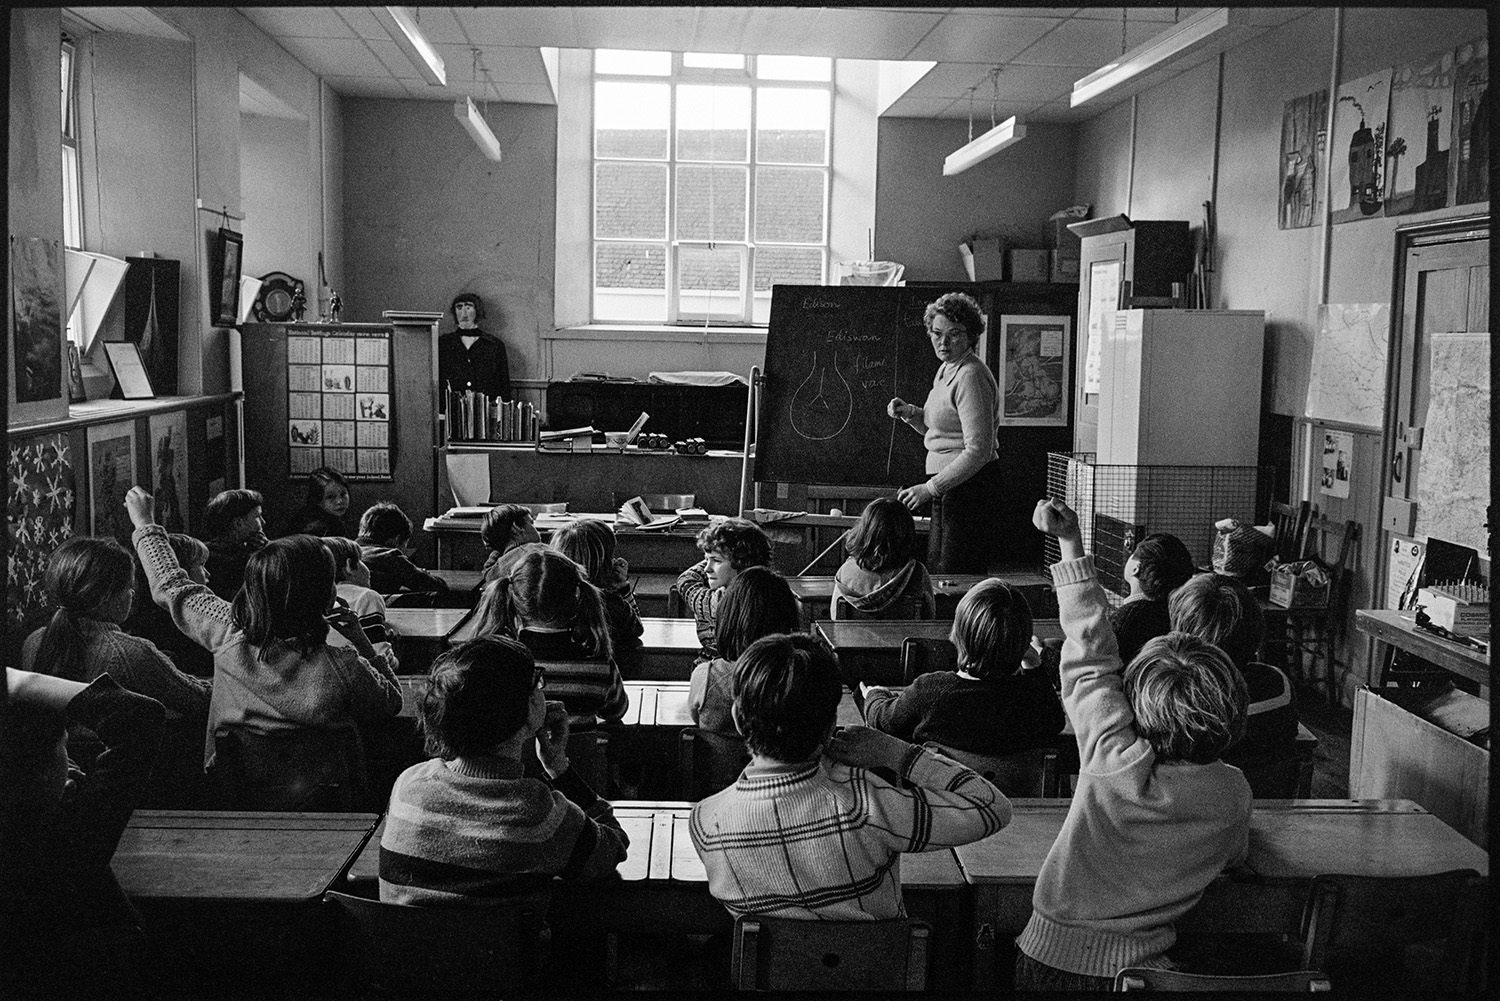 Primary school classroom with children listening to radio schools broadcast and working. 
[A woman teaching a classroom of children at Burrington Primary School. Two of the children have their hands up to answer a question. The teacher has drawn a bulb on the blackboard.]